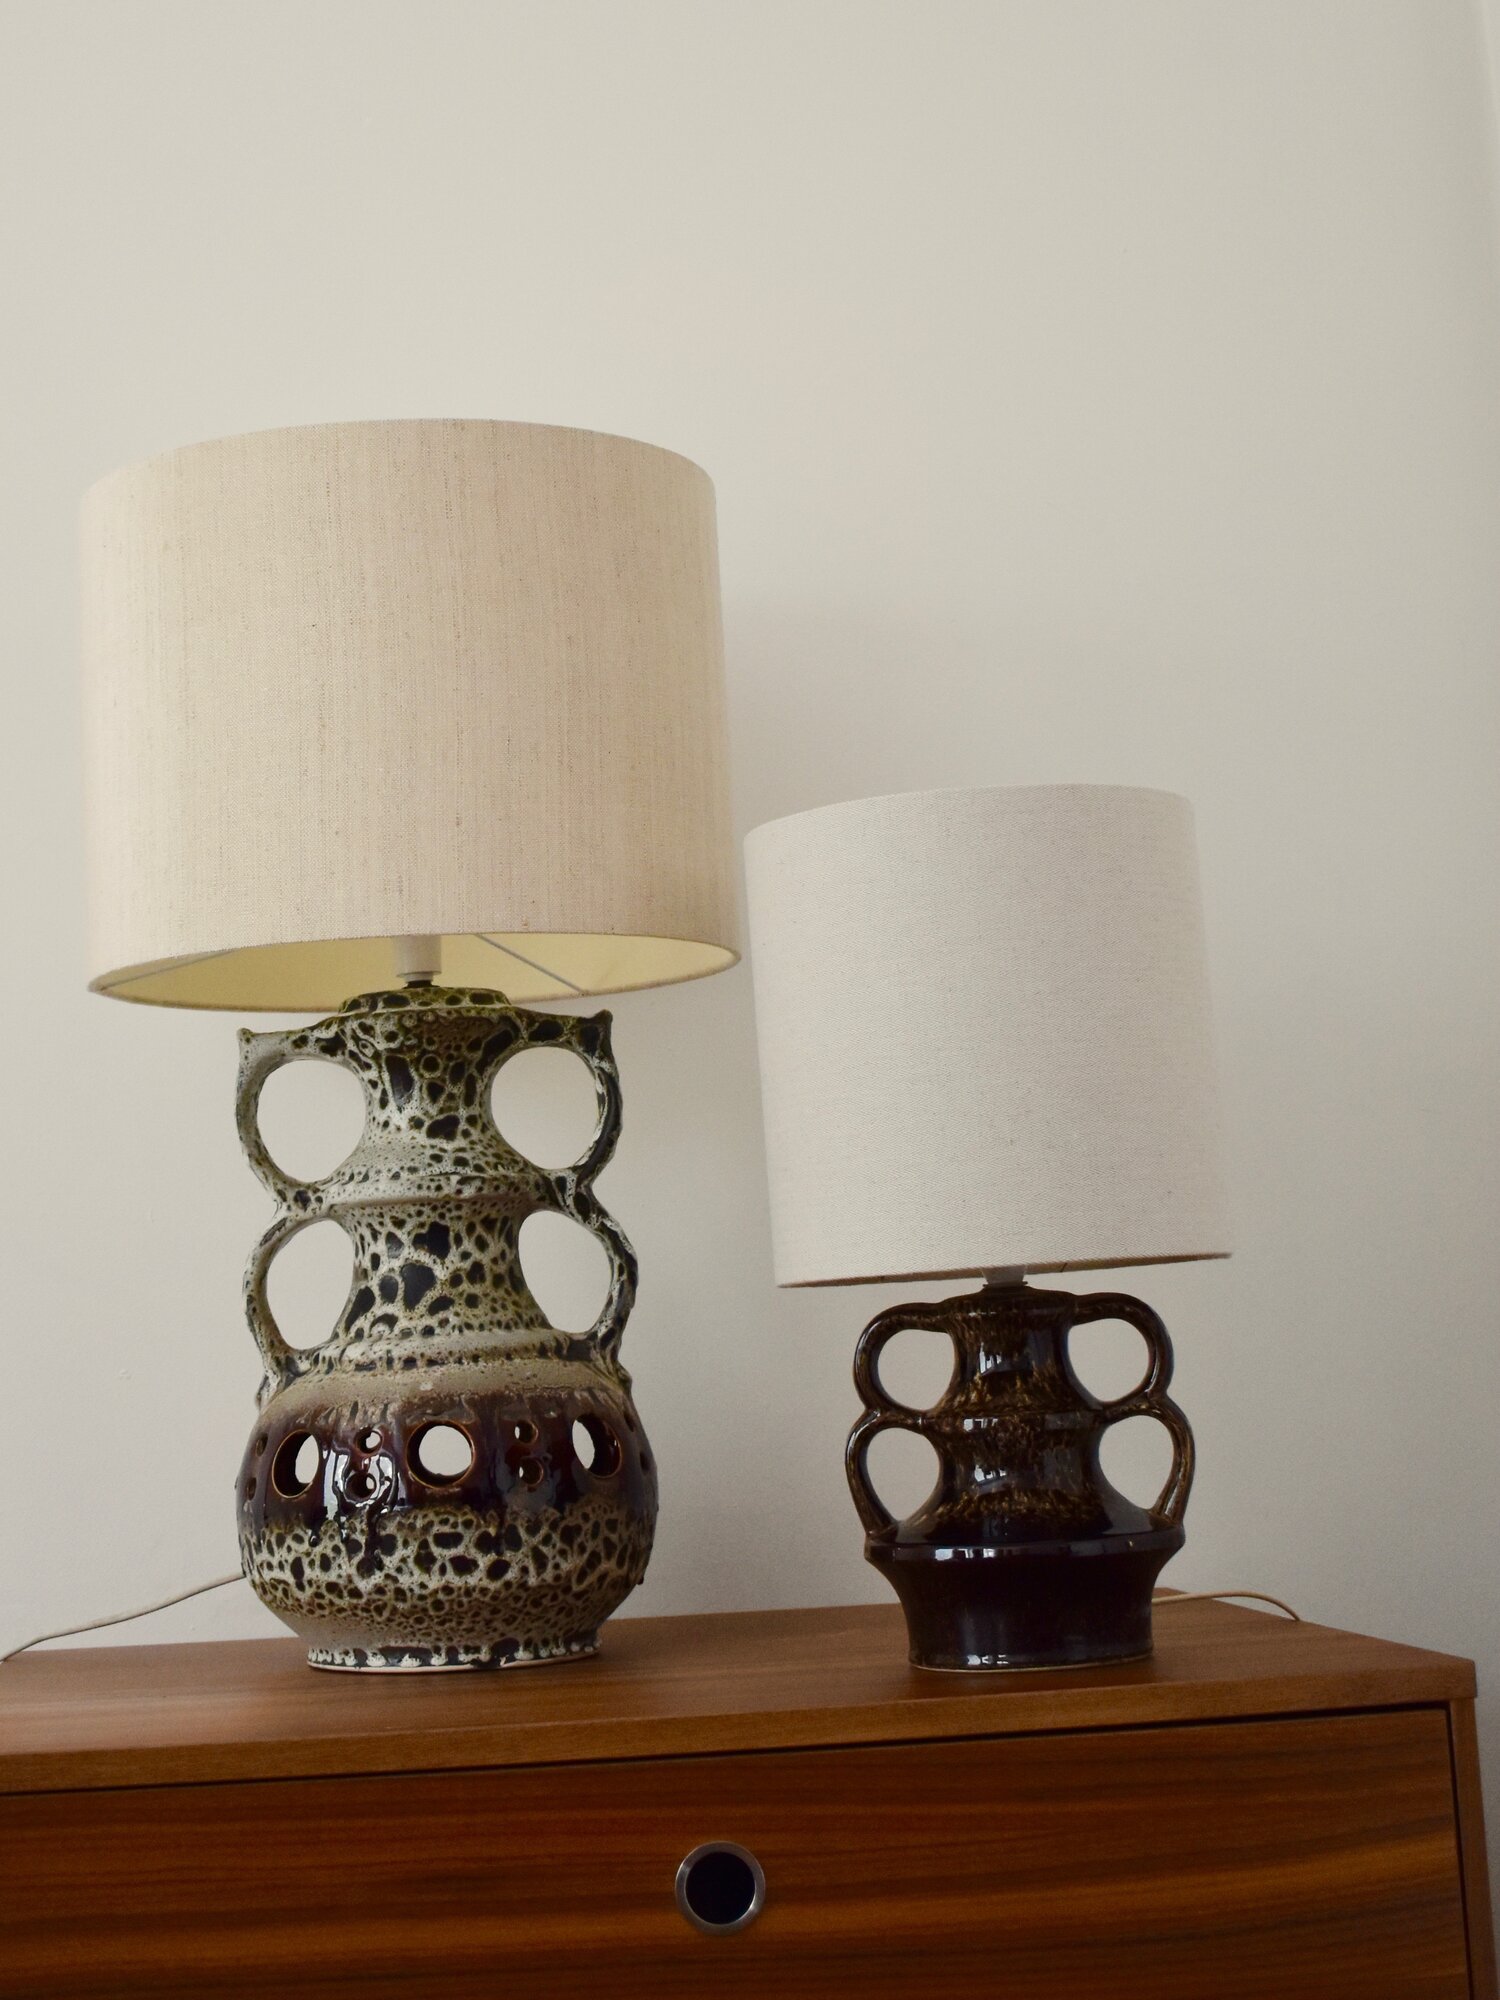 Drum Lamp Shades Feature Lighting Co Uk, Small Drum Shaped Lamp Shades